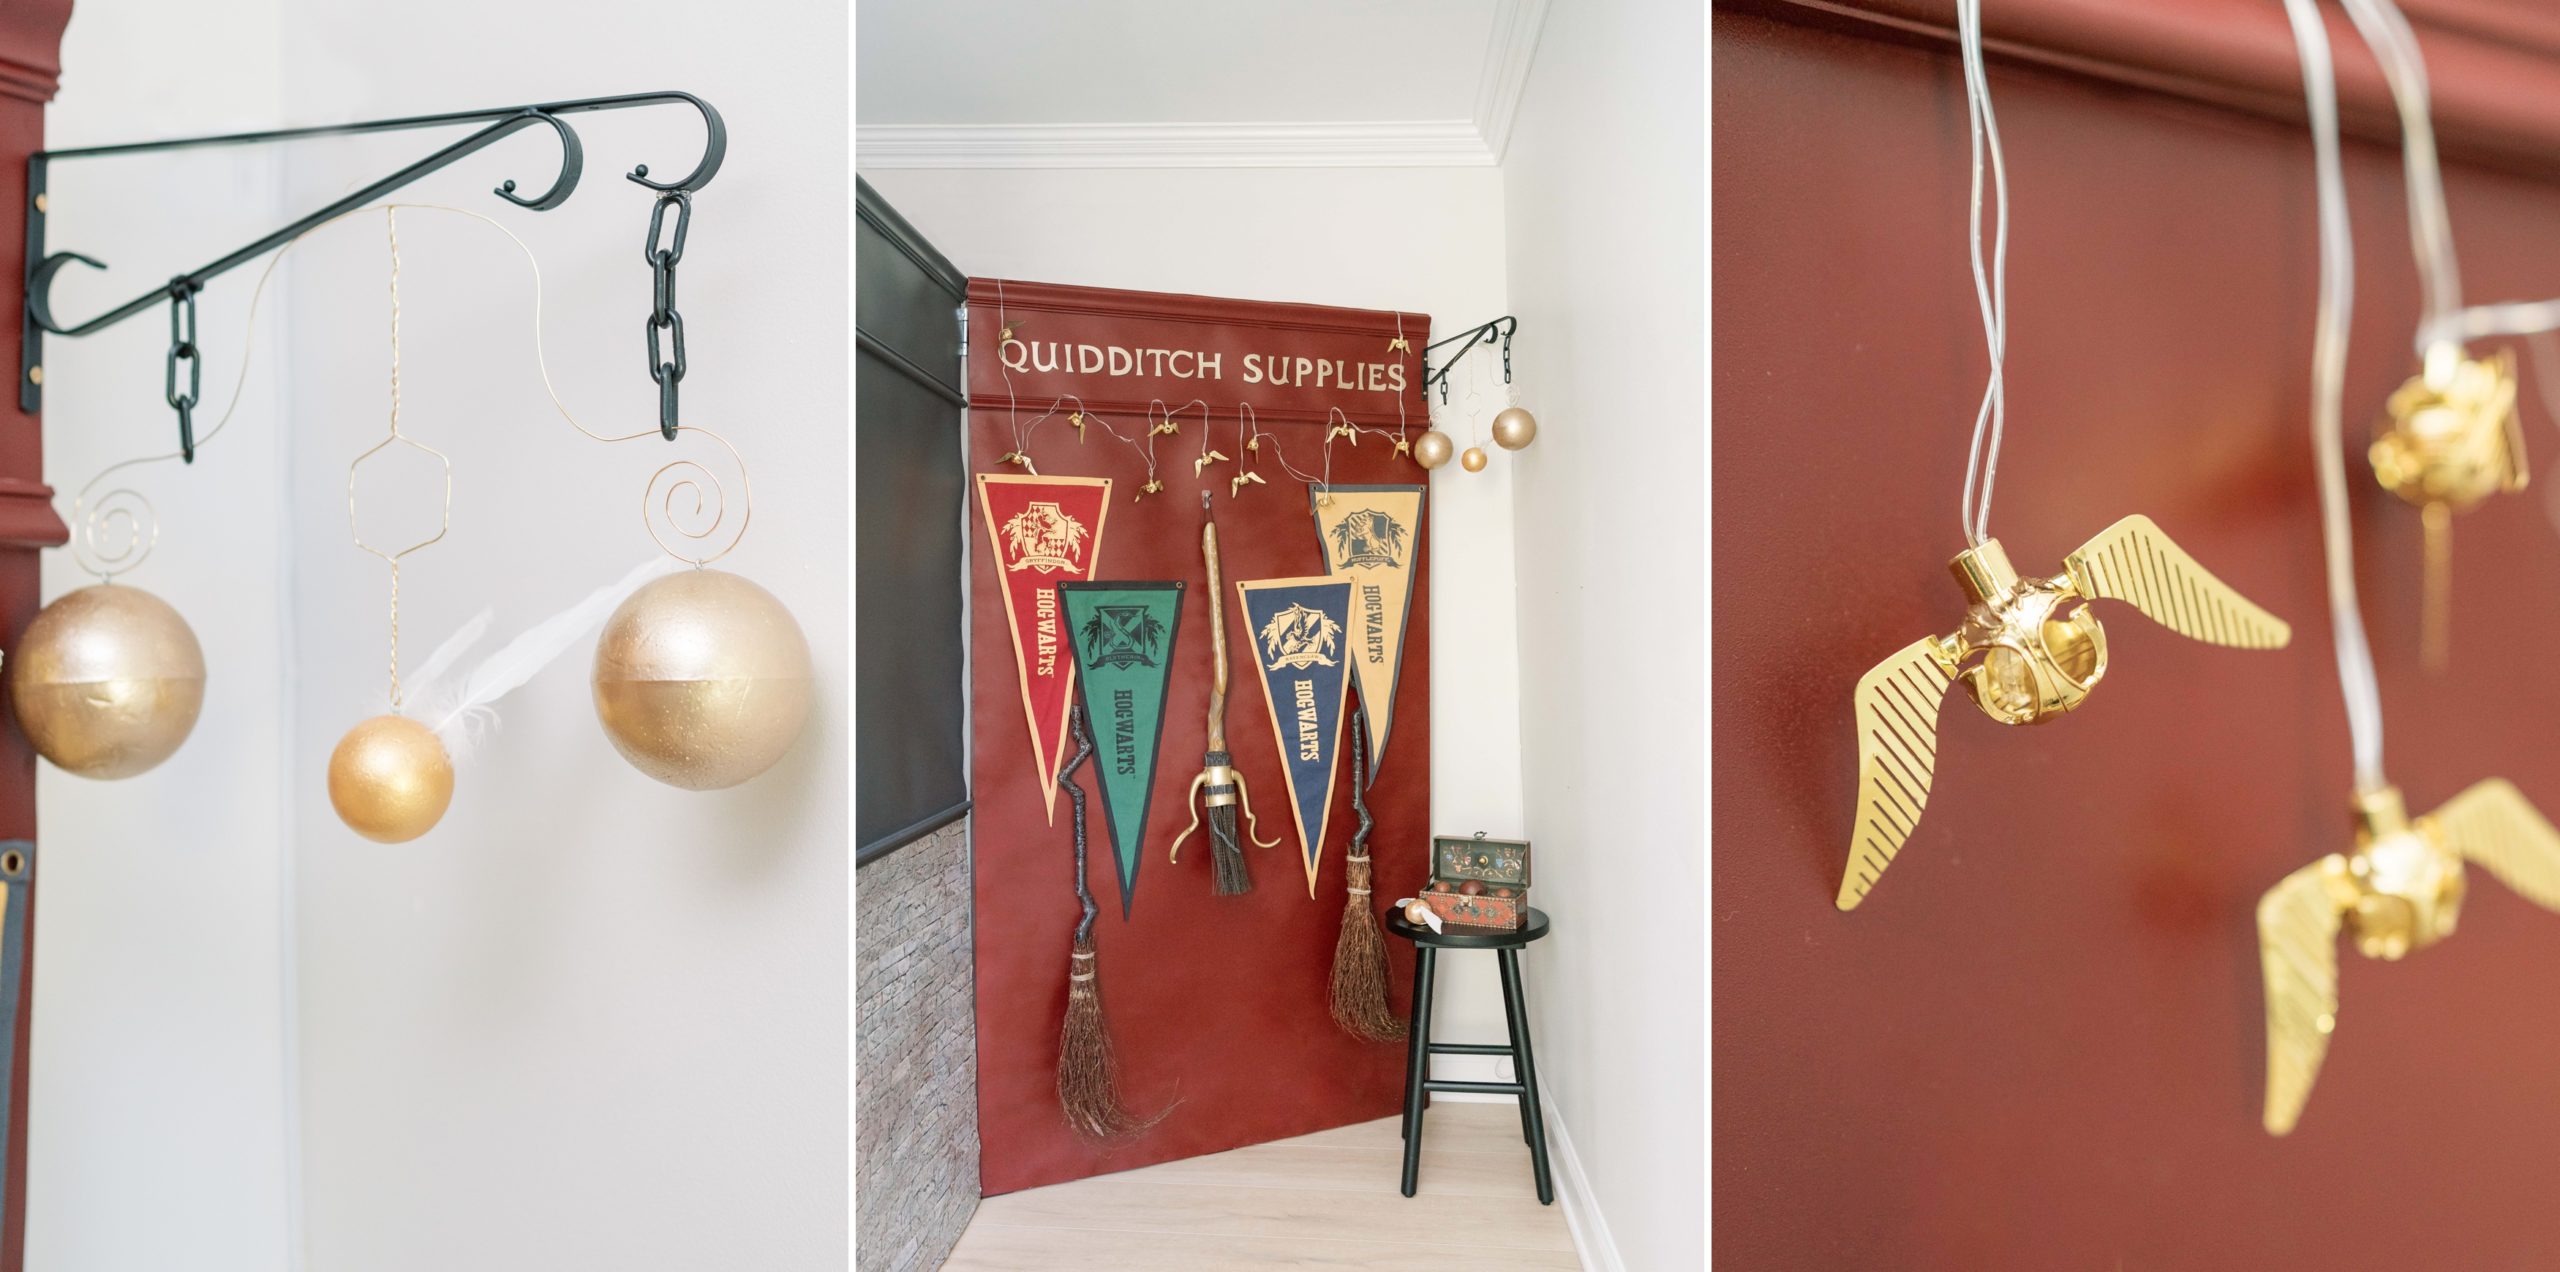 Quidditch Supplies shop from a Harry Potter Birthday Party